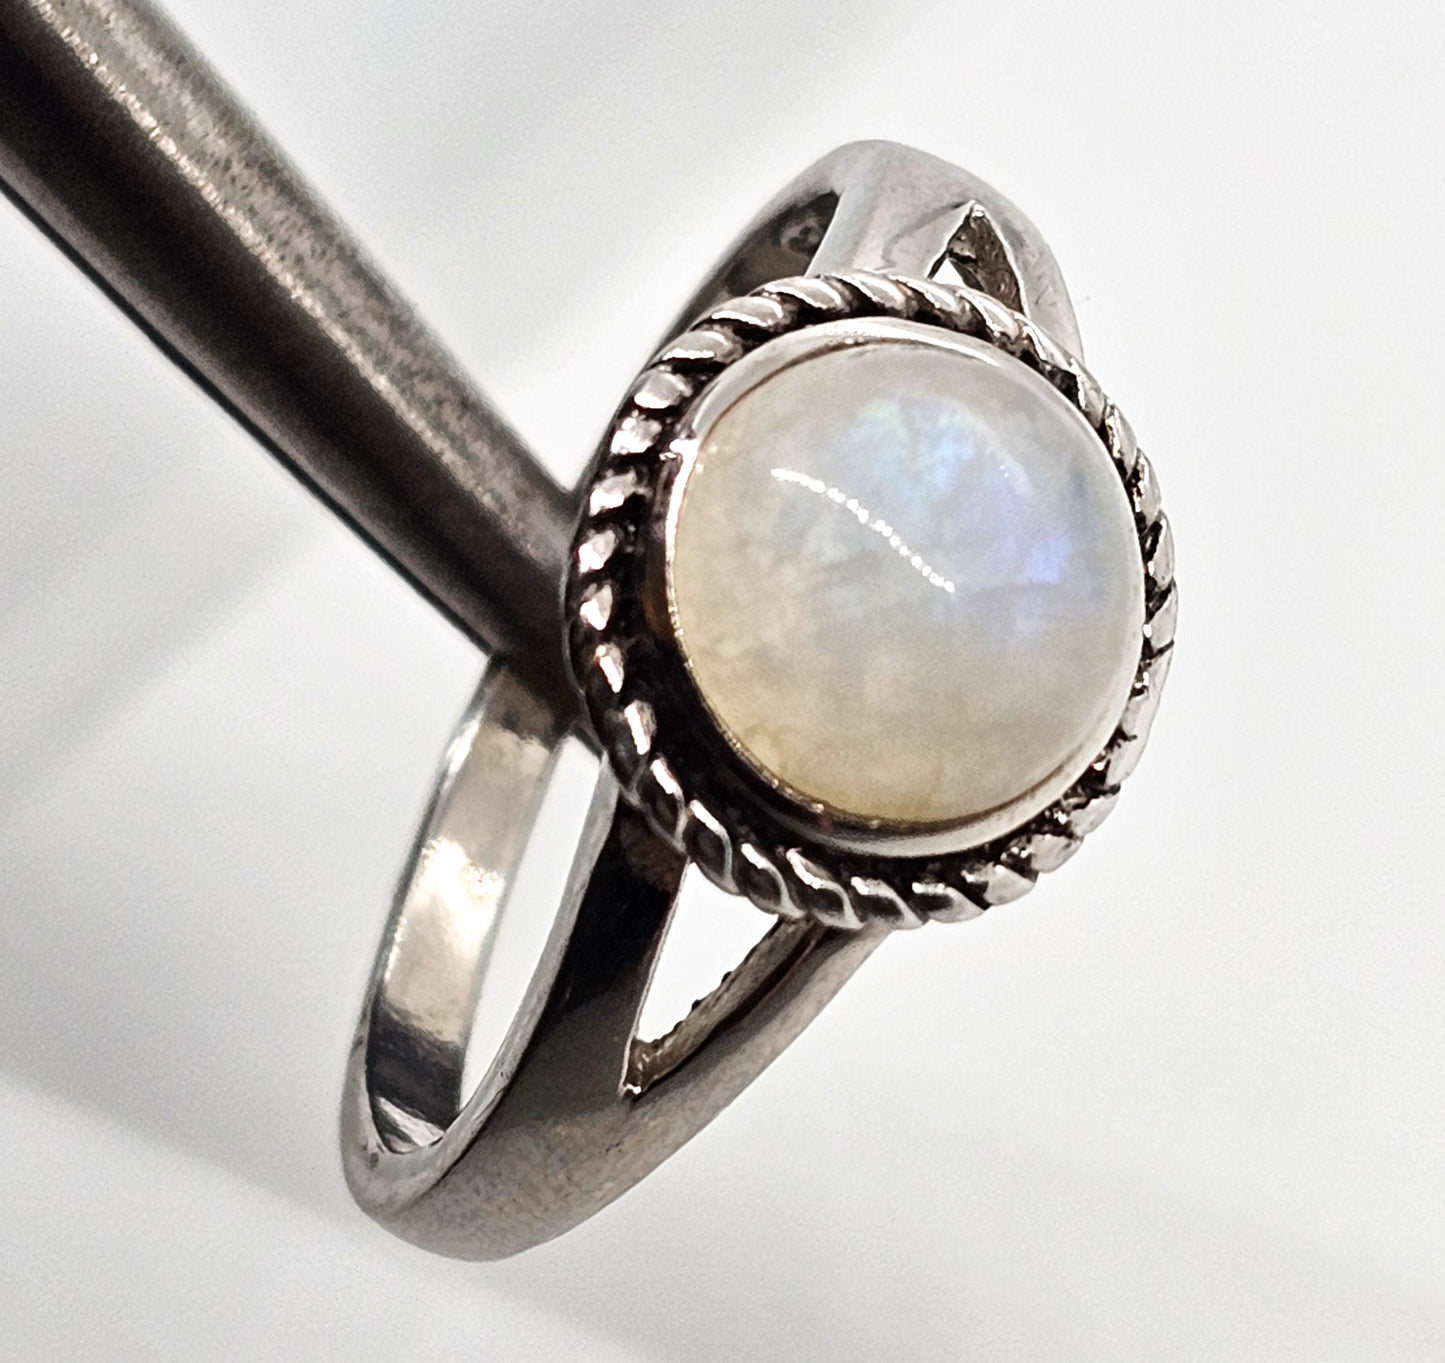 Rainbow blue round moonstone sterling silver split shank twisted rope vintage ring size 11.75